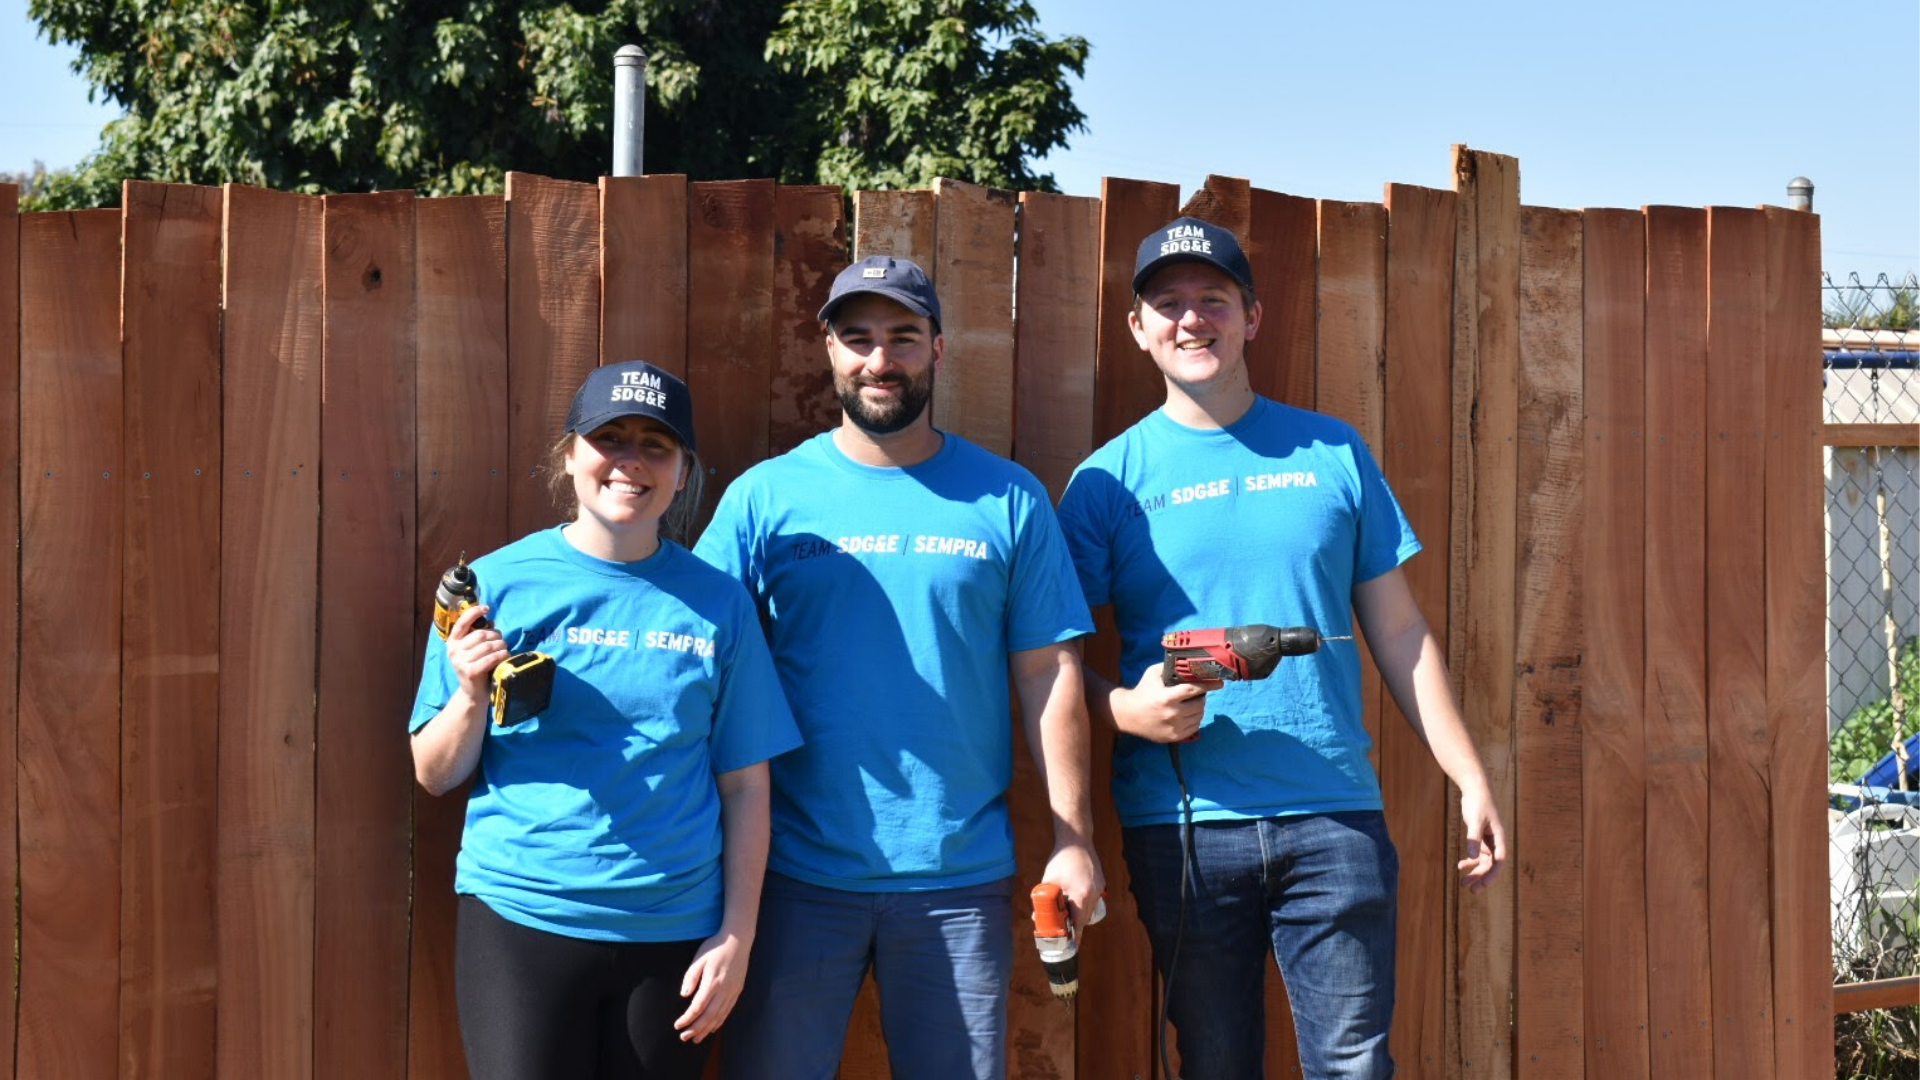 Team SDG&E volunteers pose in front of fence they built at Olivewood Gardens.